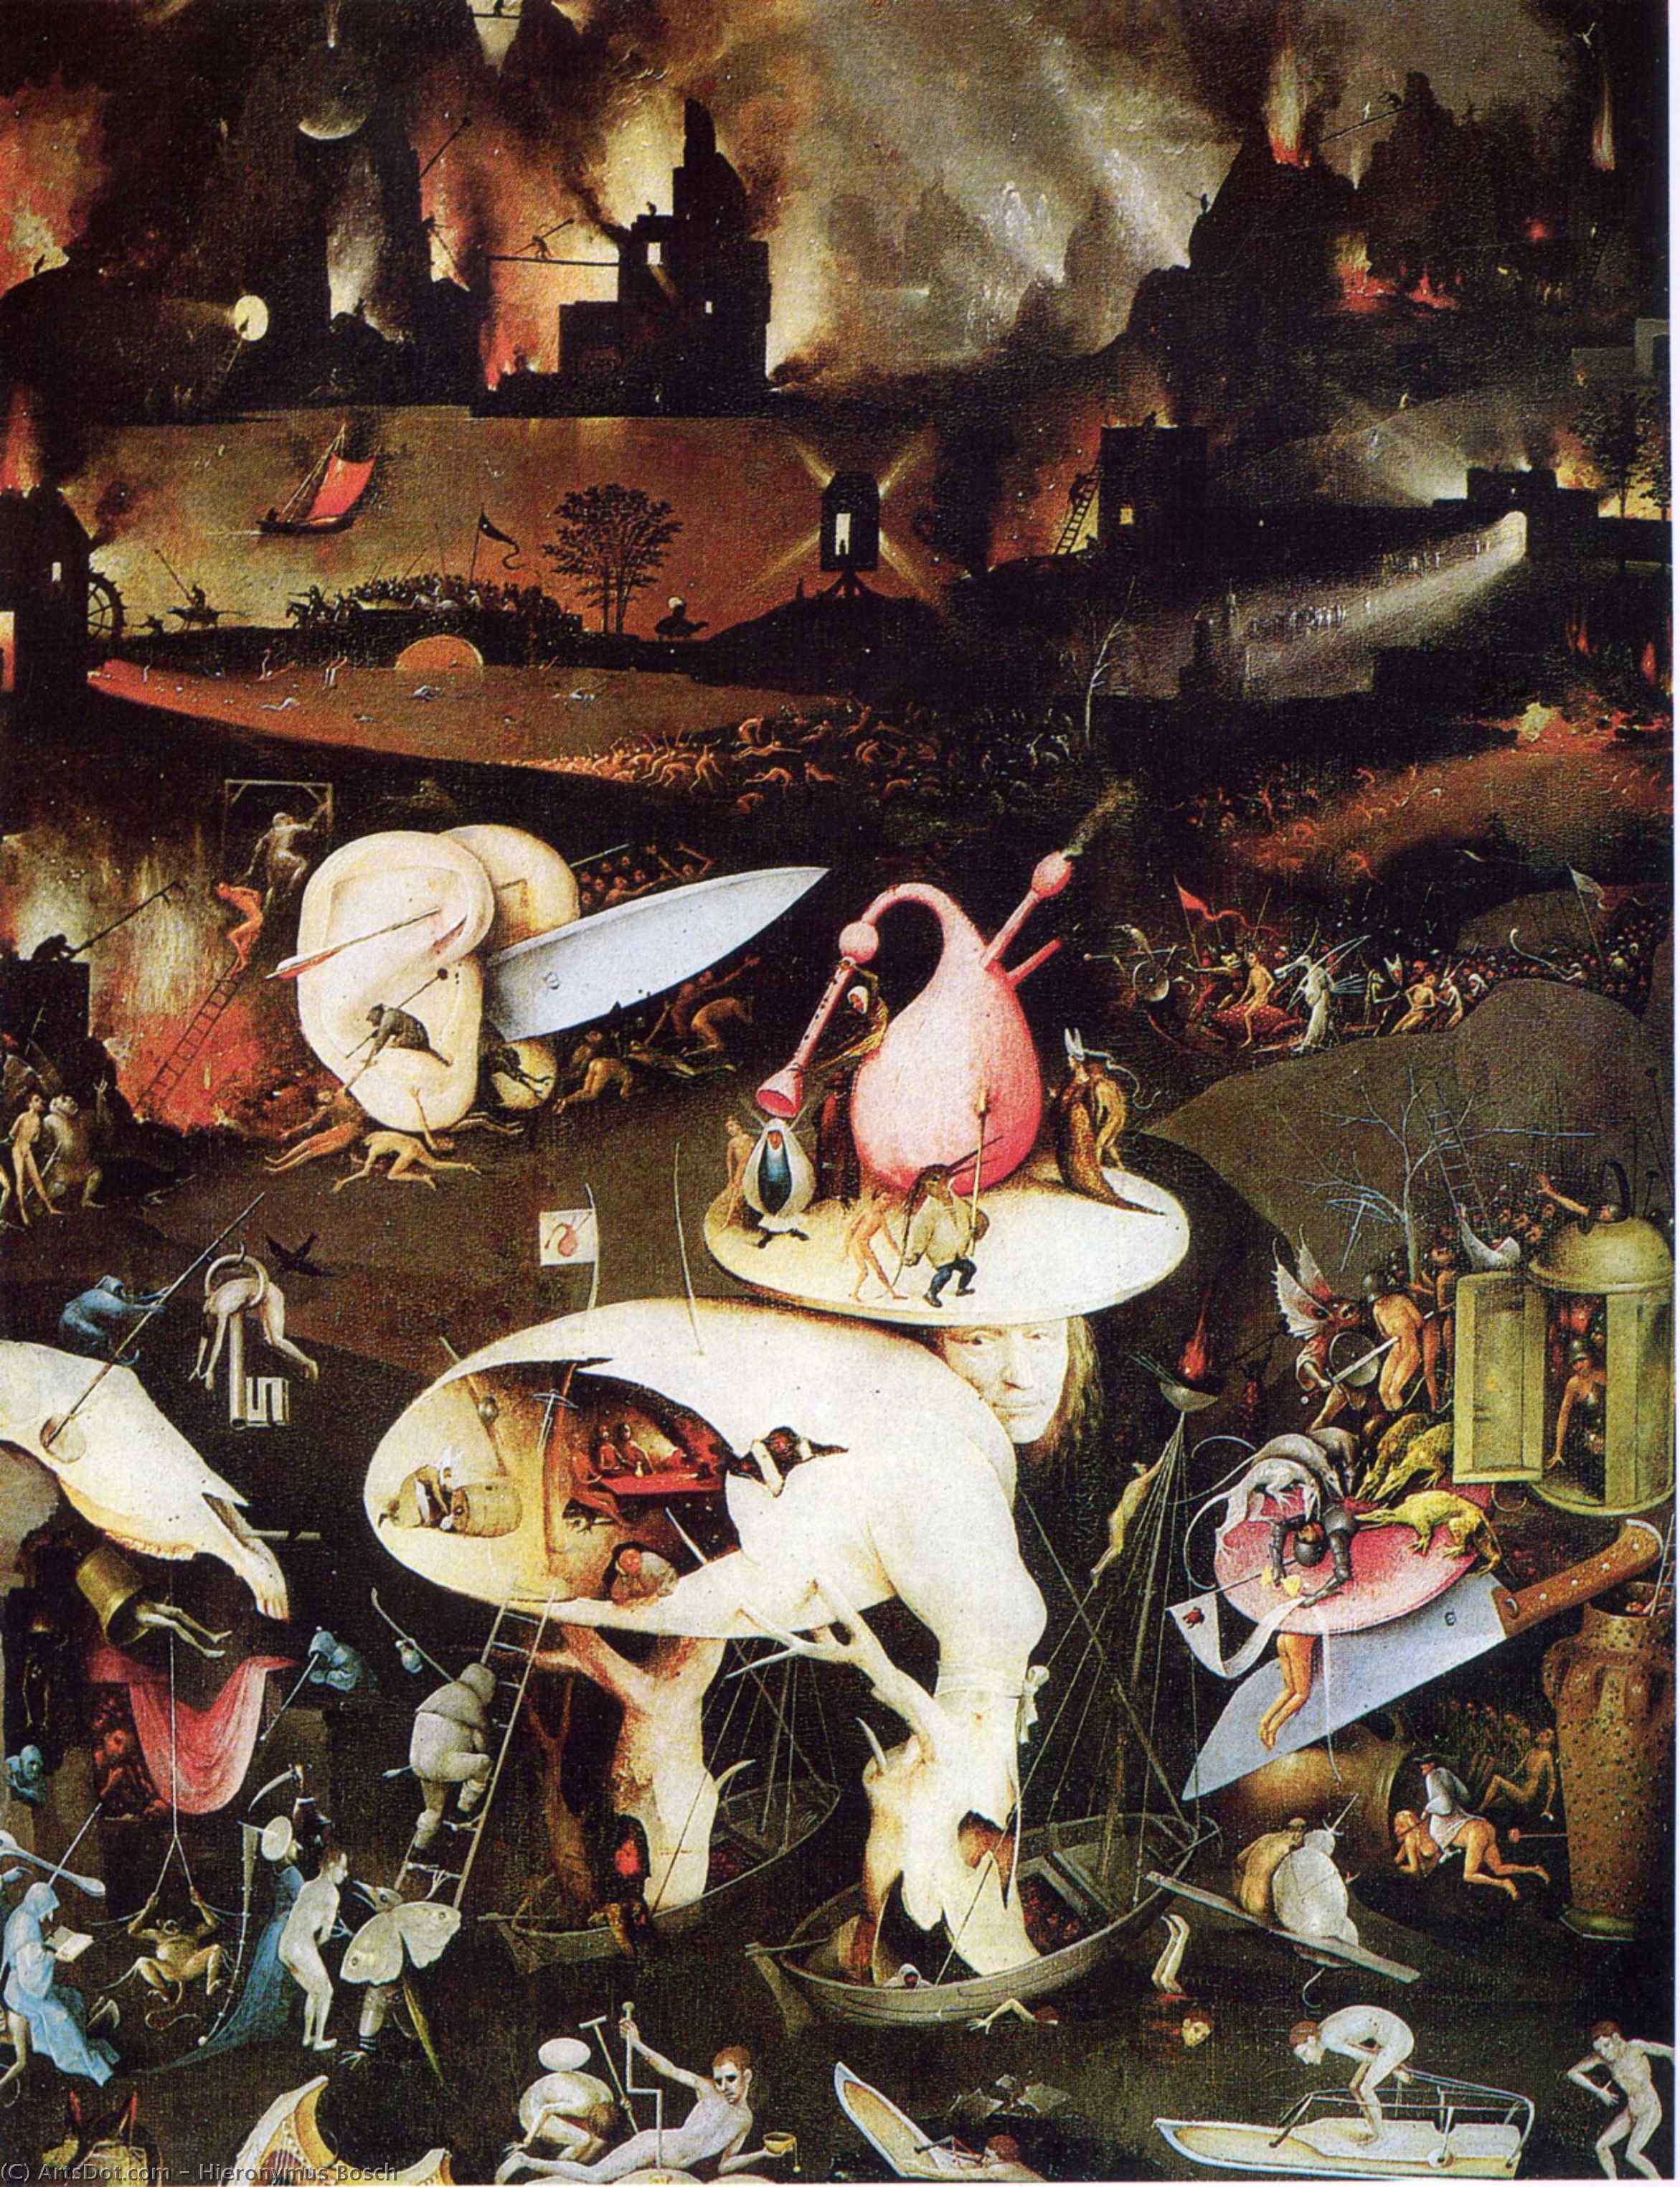 WikiOO.org - 백과 사전 - 회화, 삽화 Hieronymus Bosch - The Garden of Earthly Delights (detail)